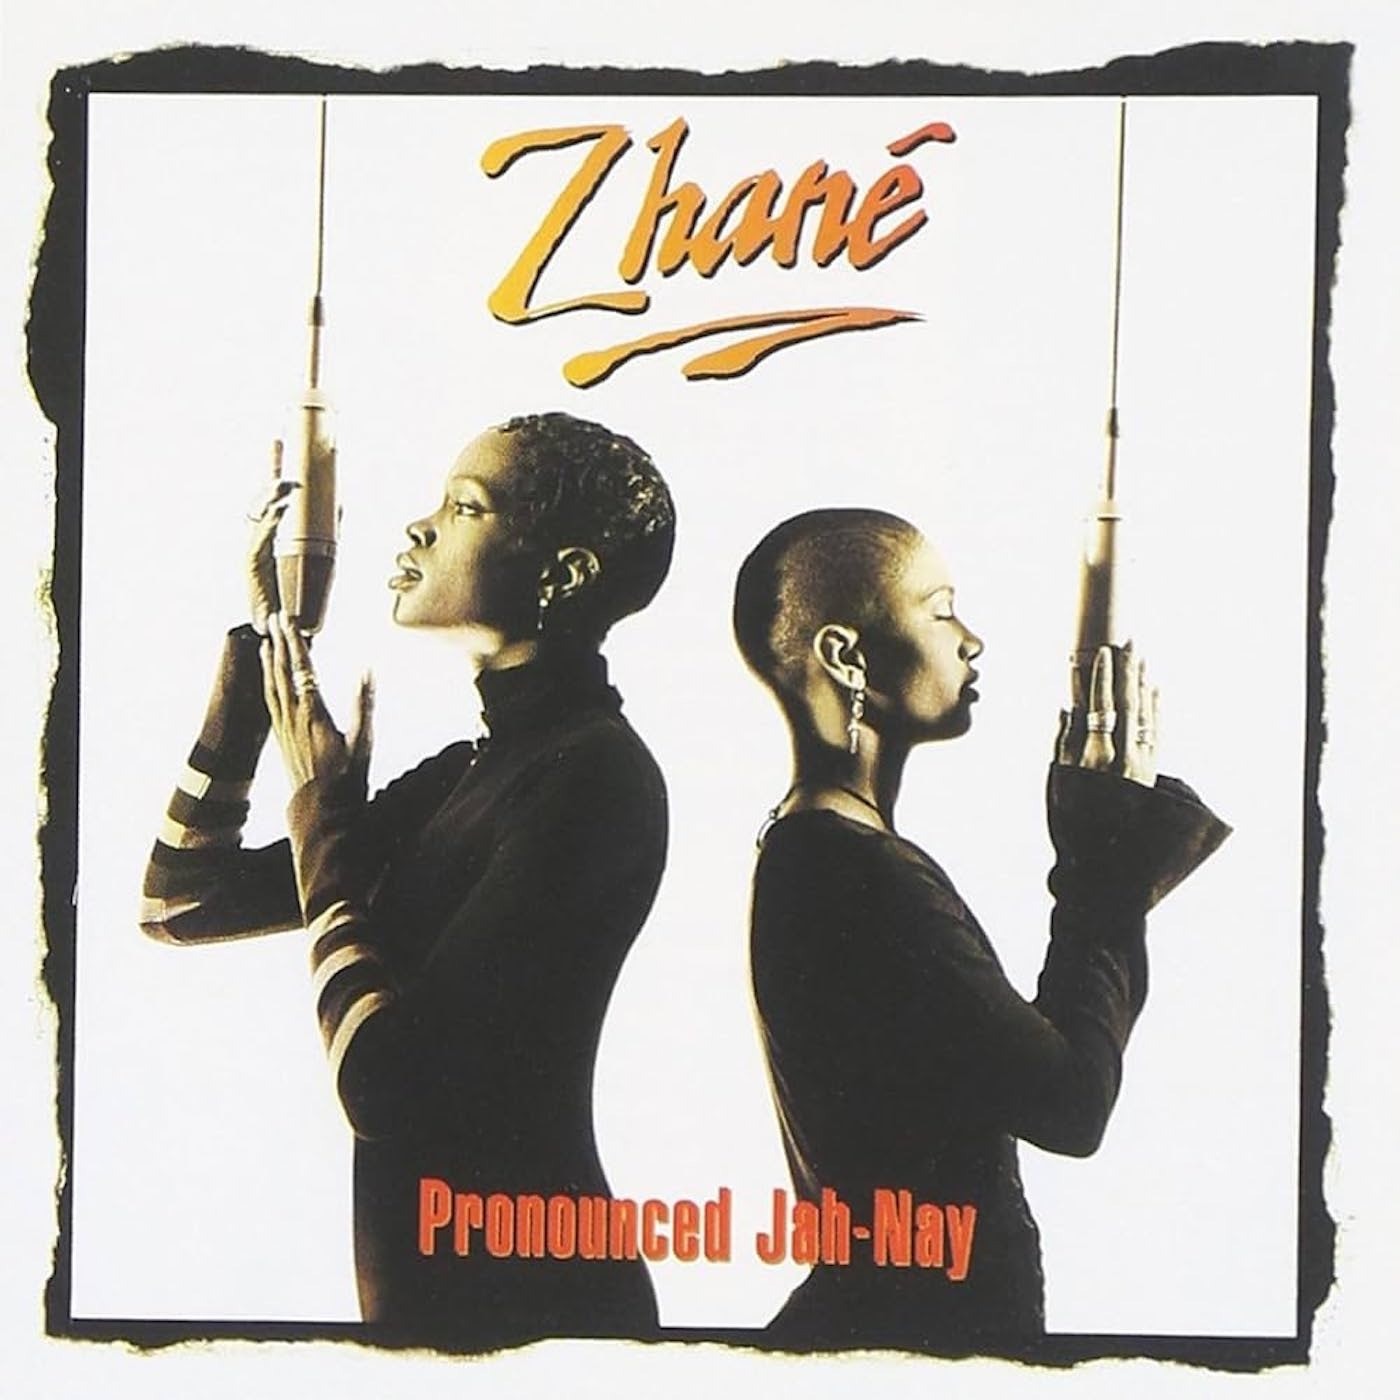 Zhané: Pronounced Jah-Nay (1994). "Gonna Make You Move & Groove"